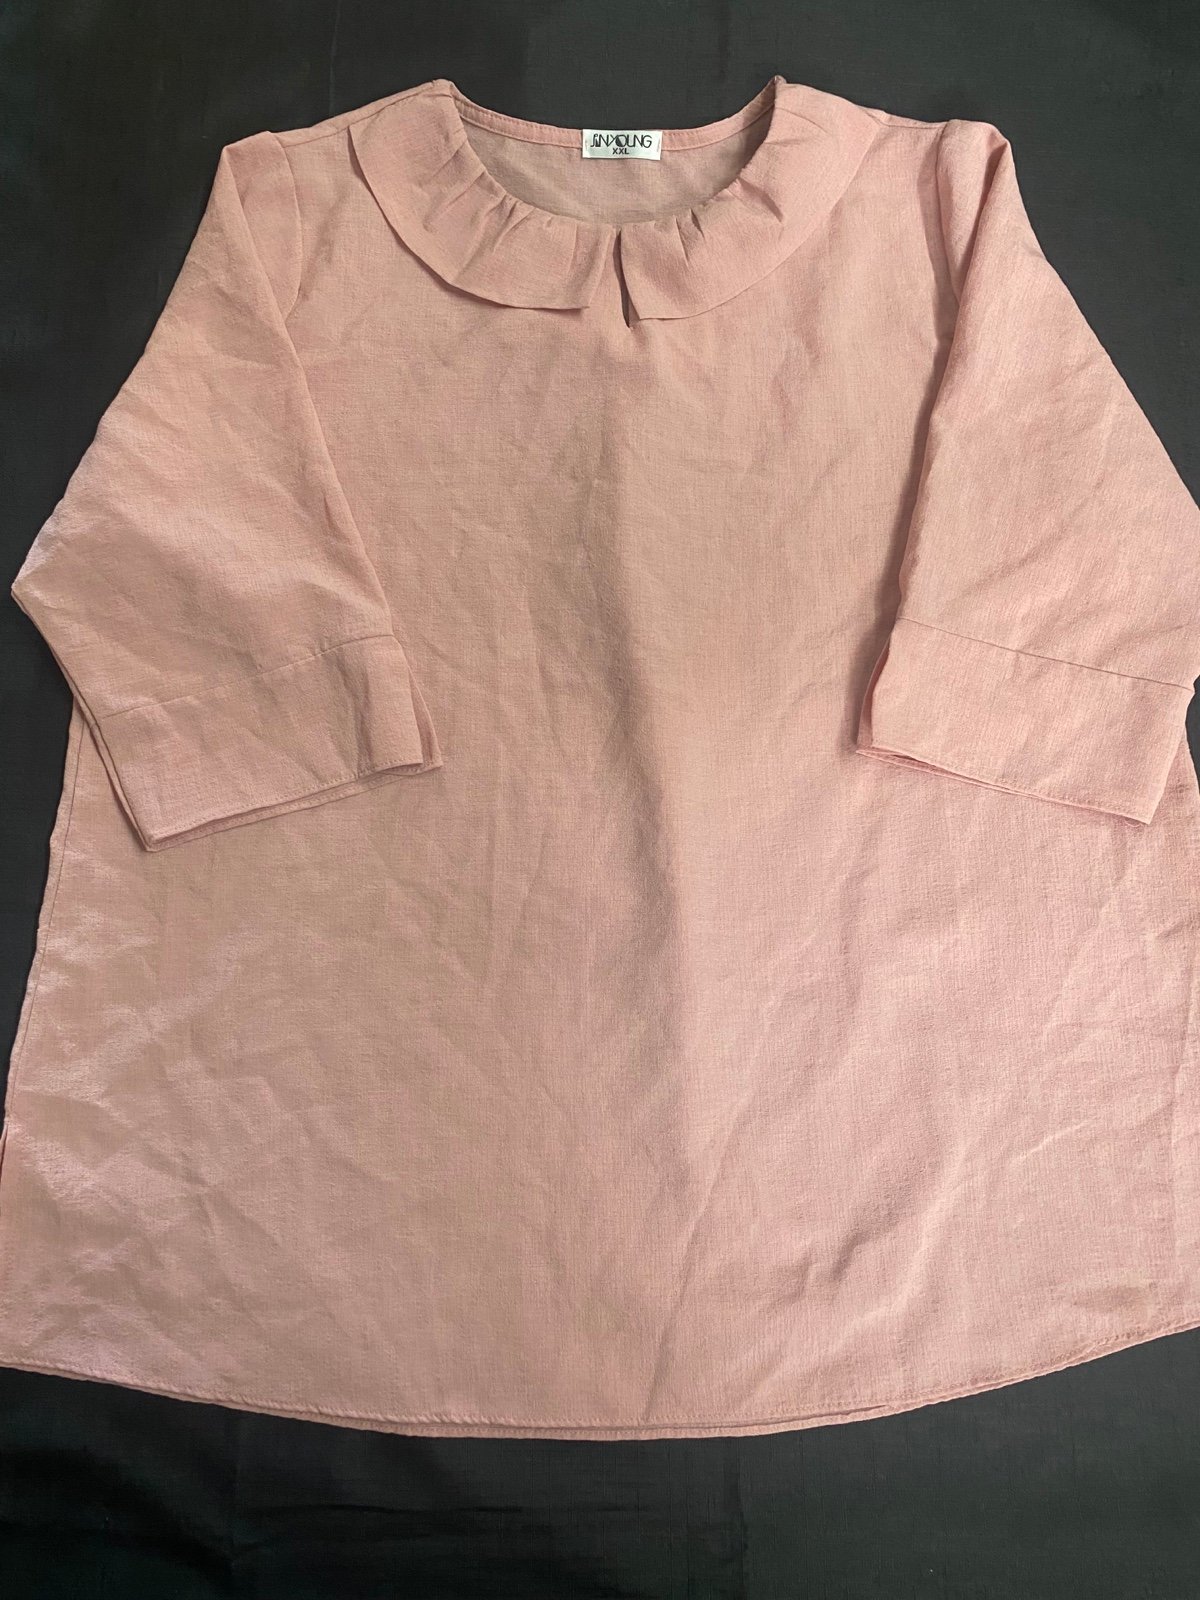 Exclusive JNYOUNG Pink Women Blouse hQHde4FgG Online Ex